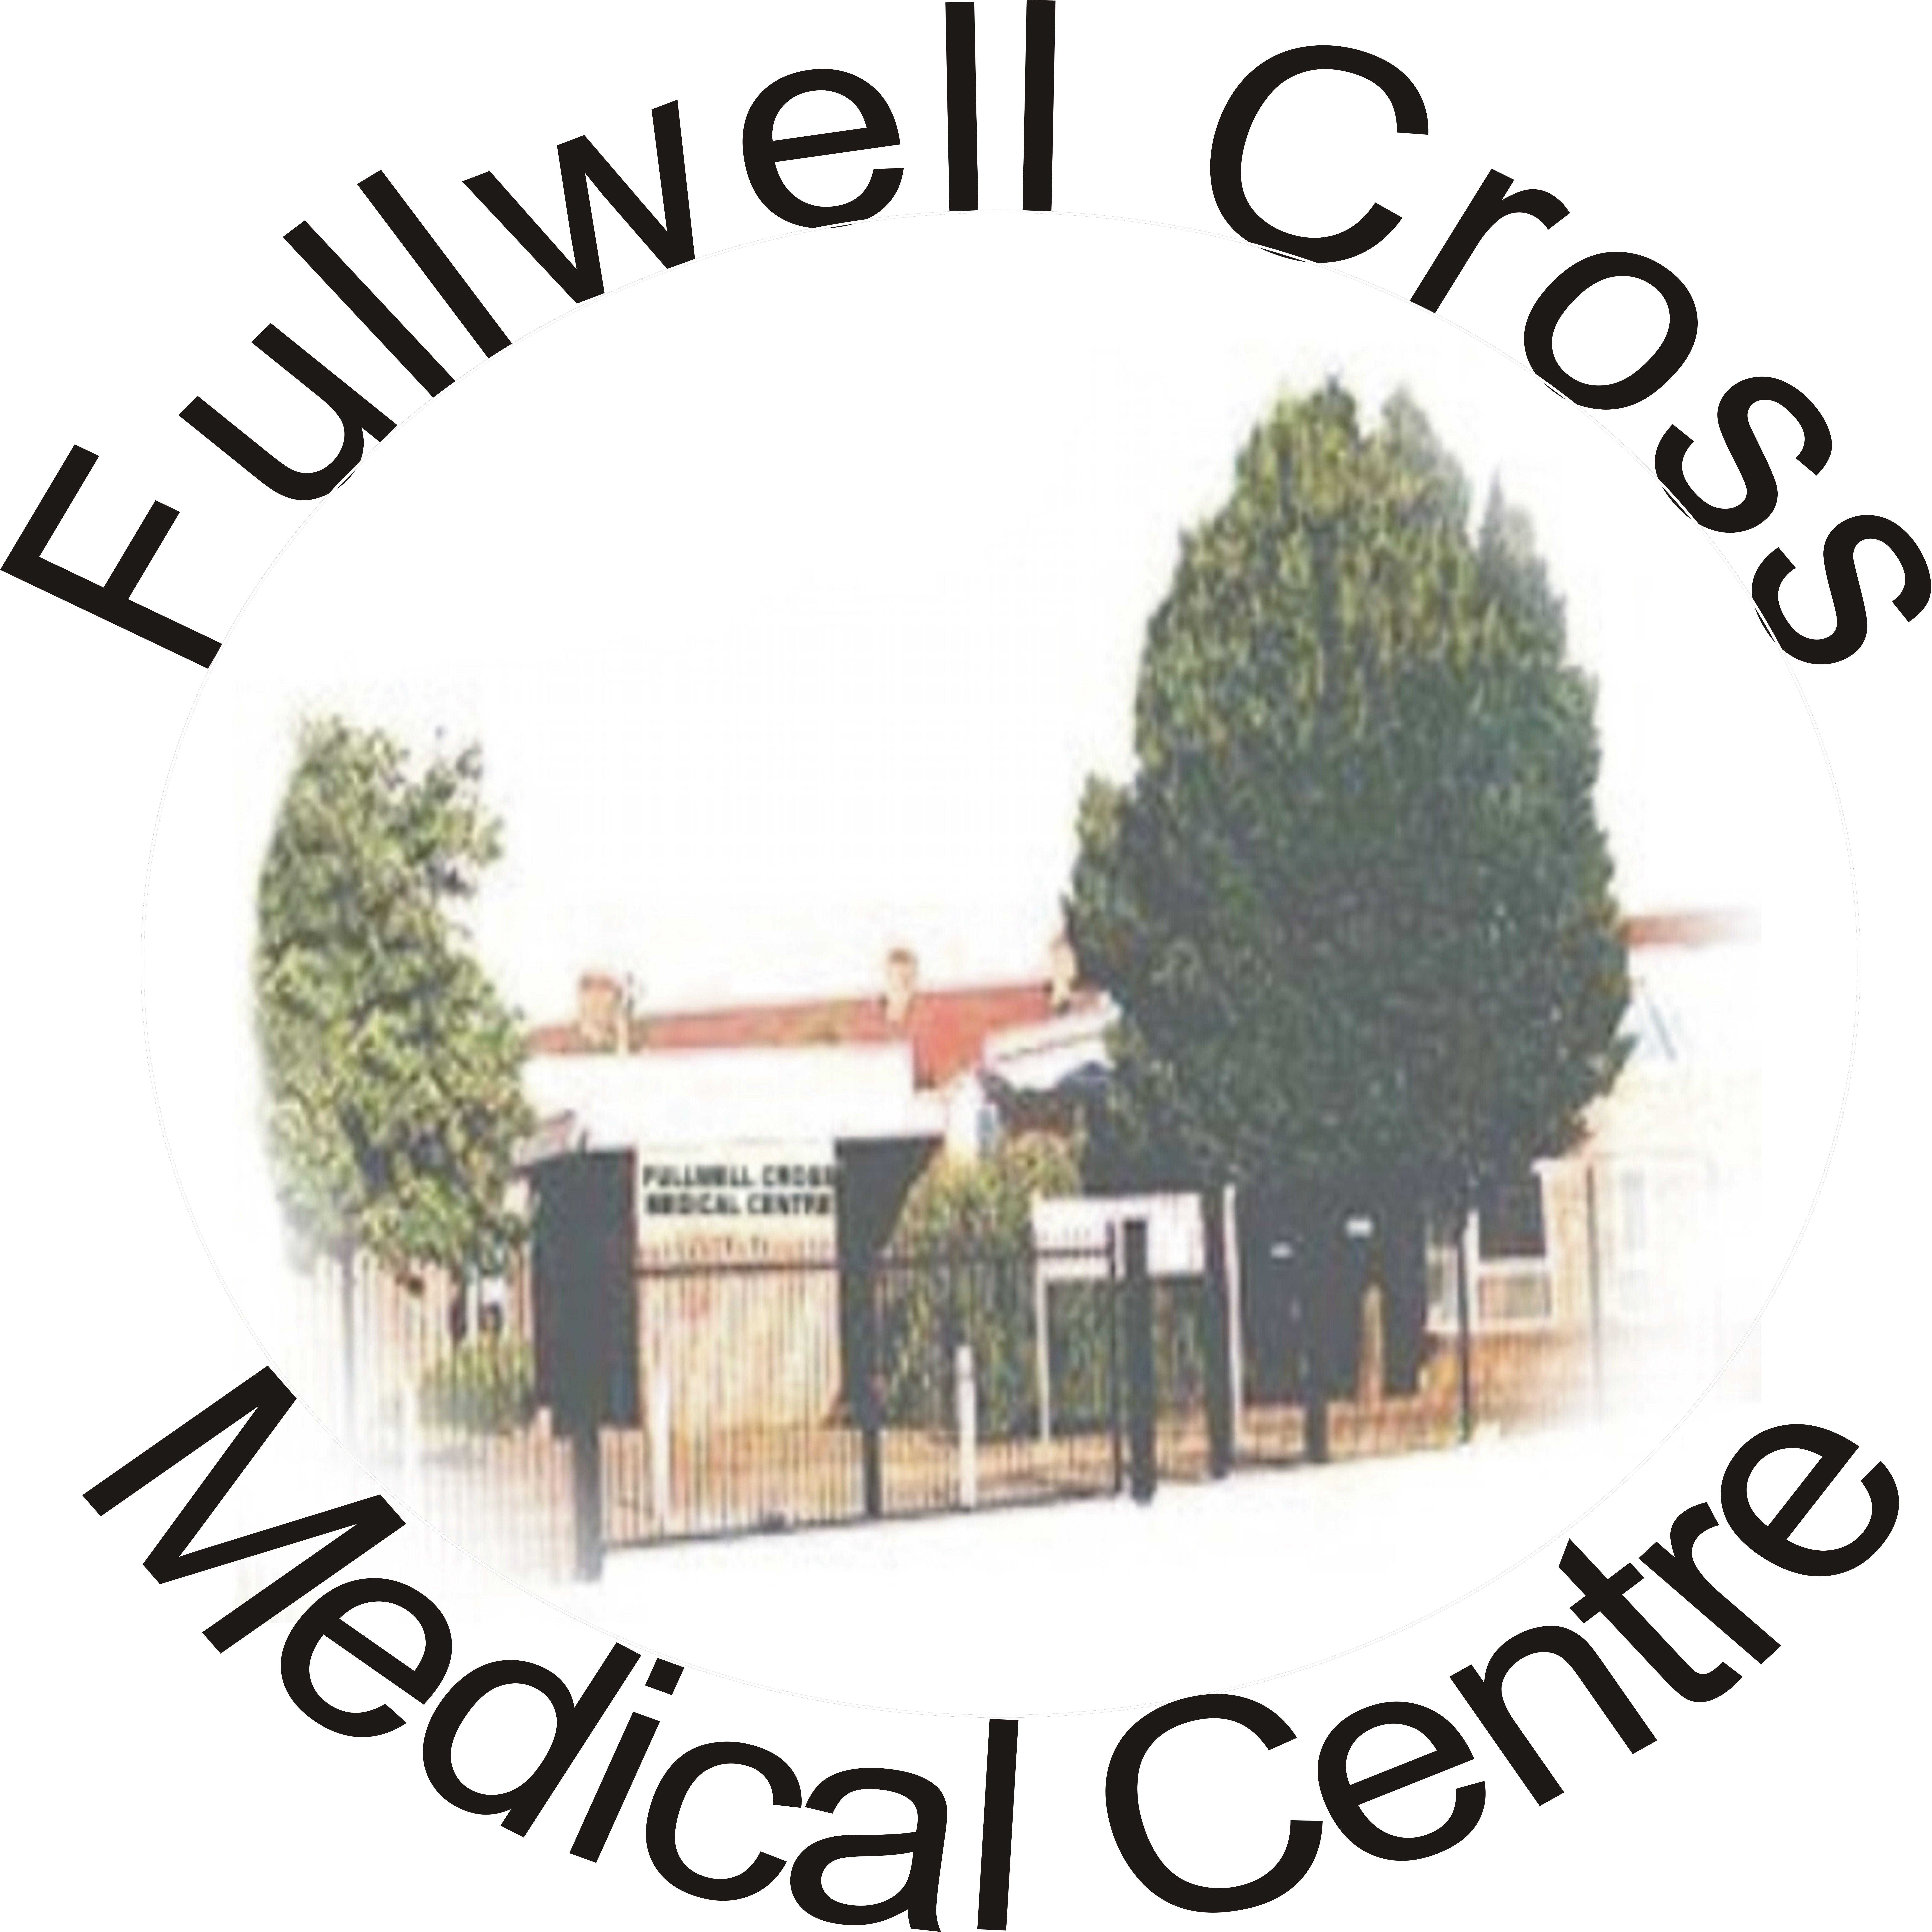 Cross Plus Medical Family Care Clinic Logo - The Fullwell Cross Medical Centre - 1 Tomswood Hill, Barkingside ...